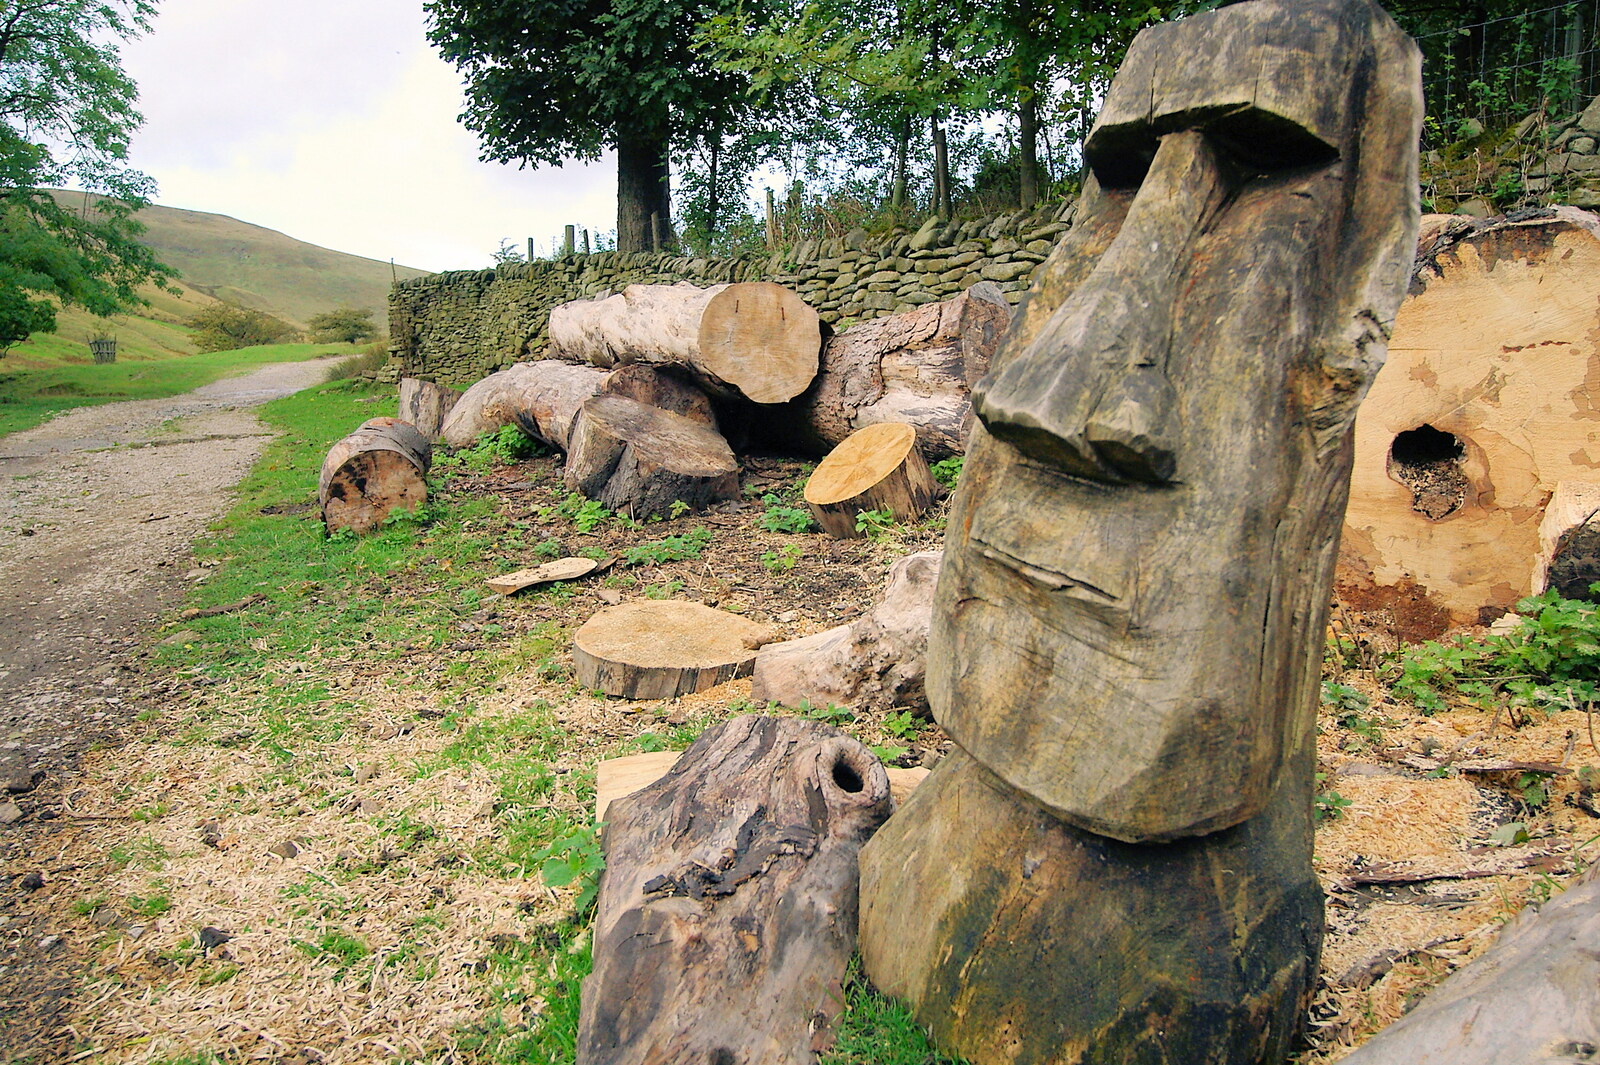 The Pennine Way: Lost on Kinder Scout, Derbyshire - 9th October 2005: A wooden head, like the Moai of Easter Island